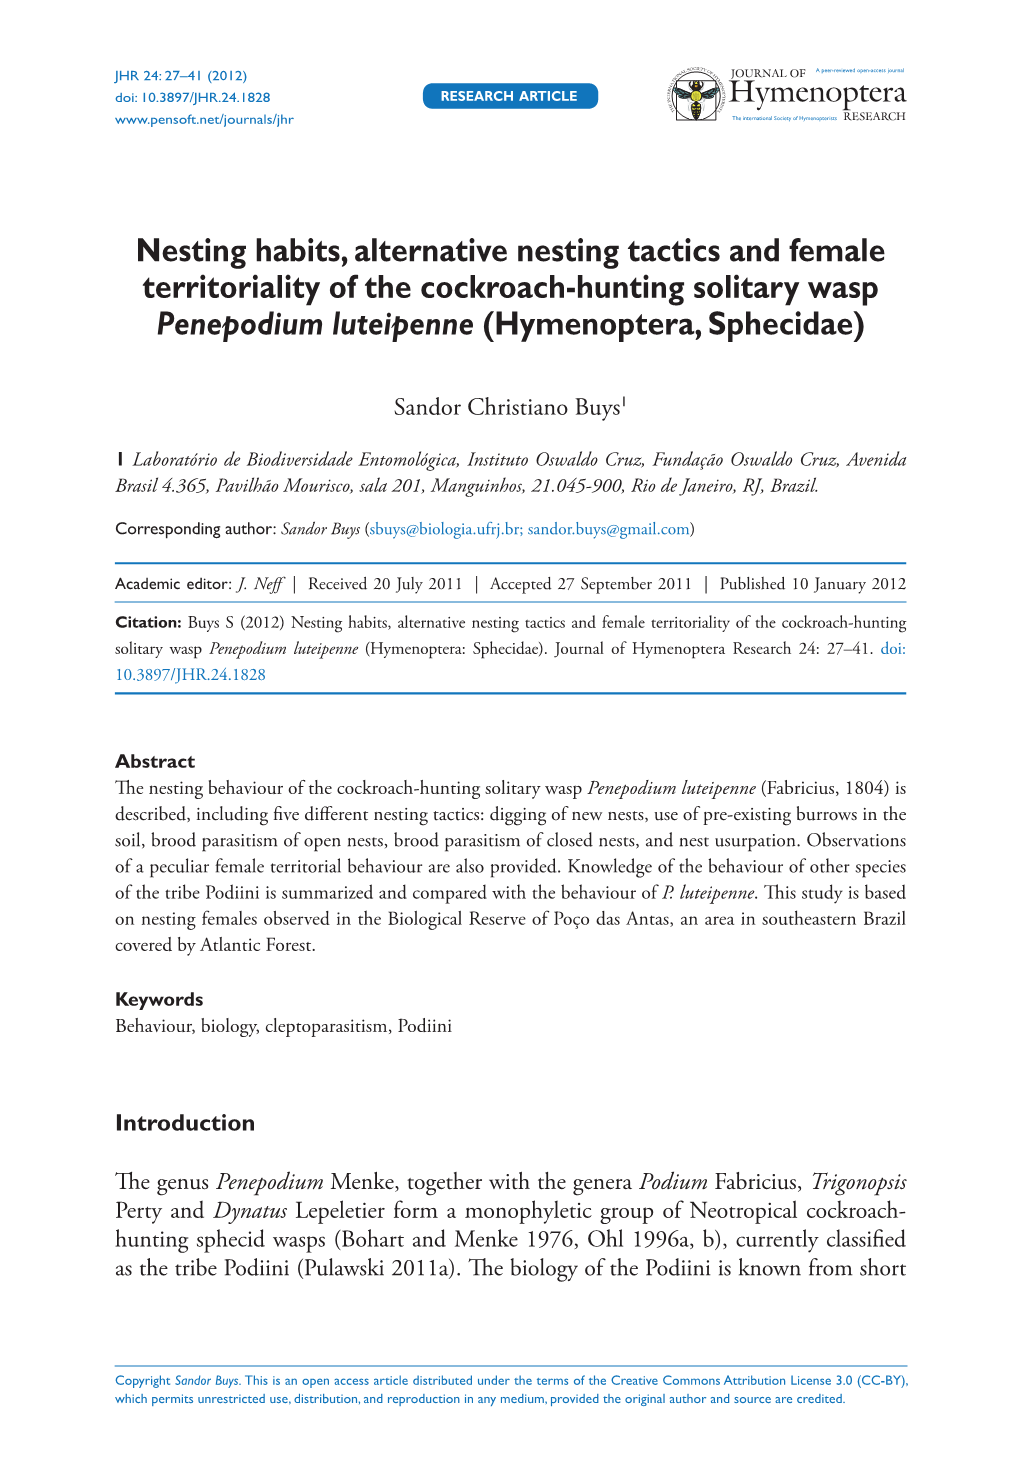 Nesting Habits, Alternative Nesting Tactics and Female Territoriality of the Cockroach-Hunting Solitary Wasp Penepodium Luteipenne (Hymenoptera, Sphecidae)